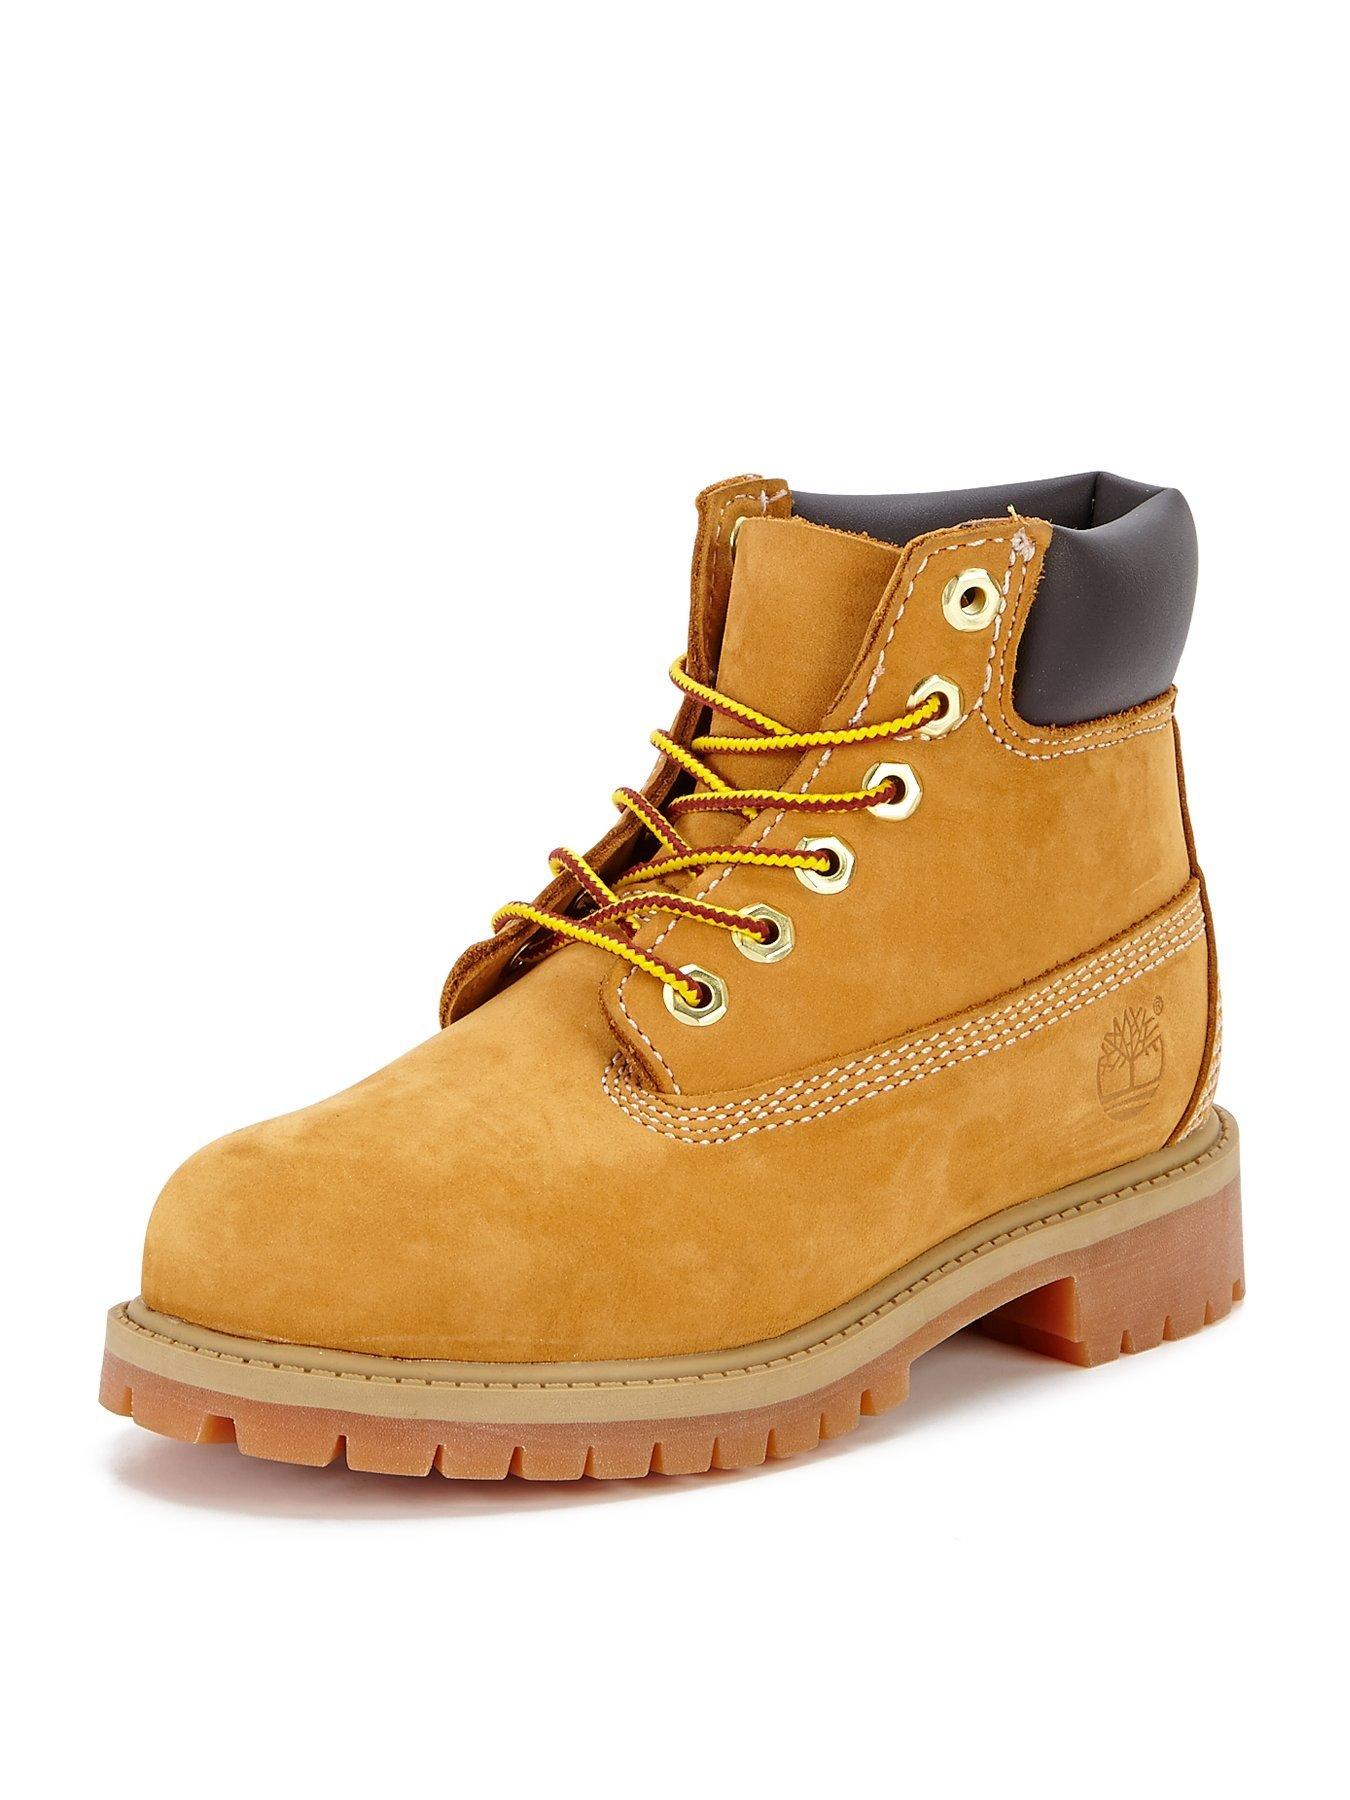 Timberland Inch Premium Classic Boots | very.co.uk